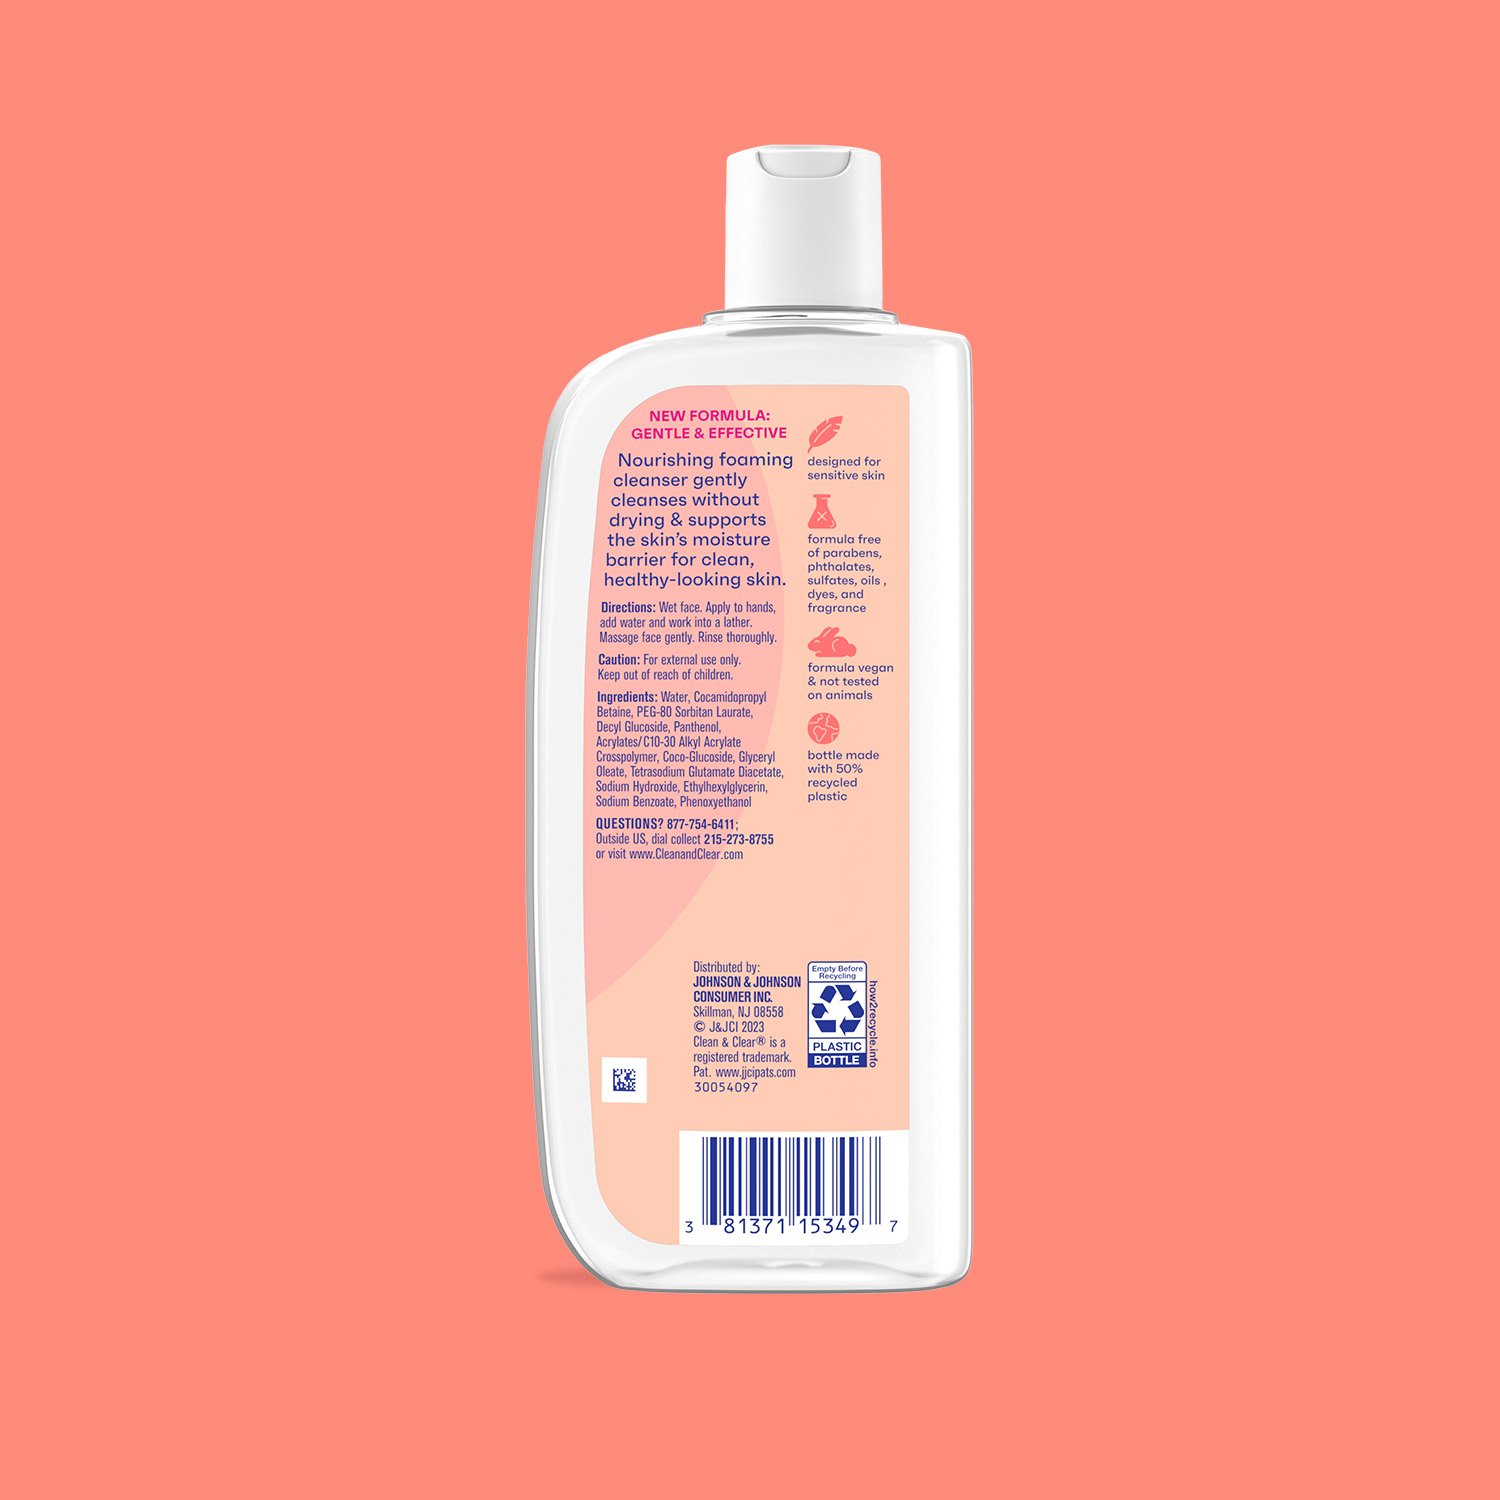 Clean and Clear Foaming Facial Wash: Review, Price, Oil Control